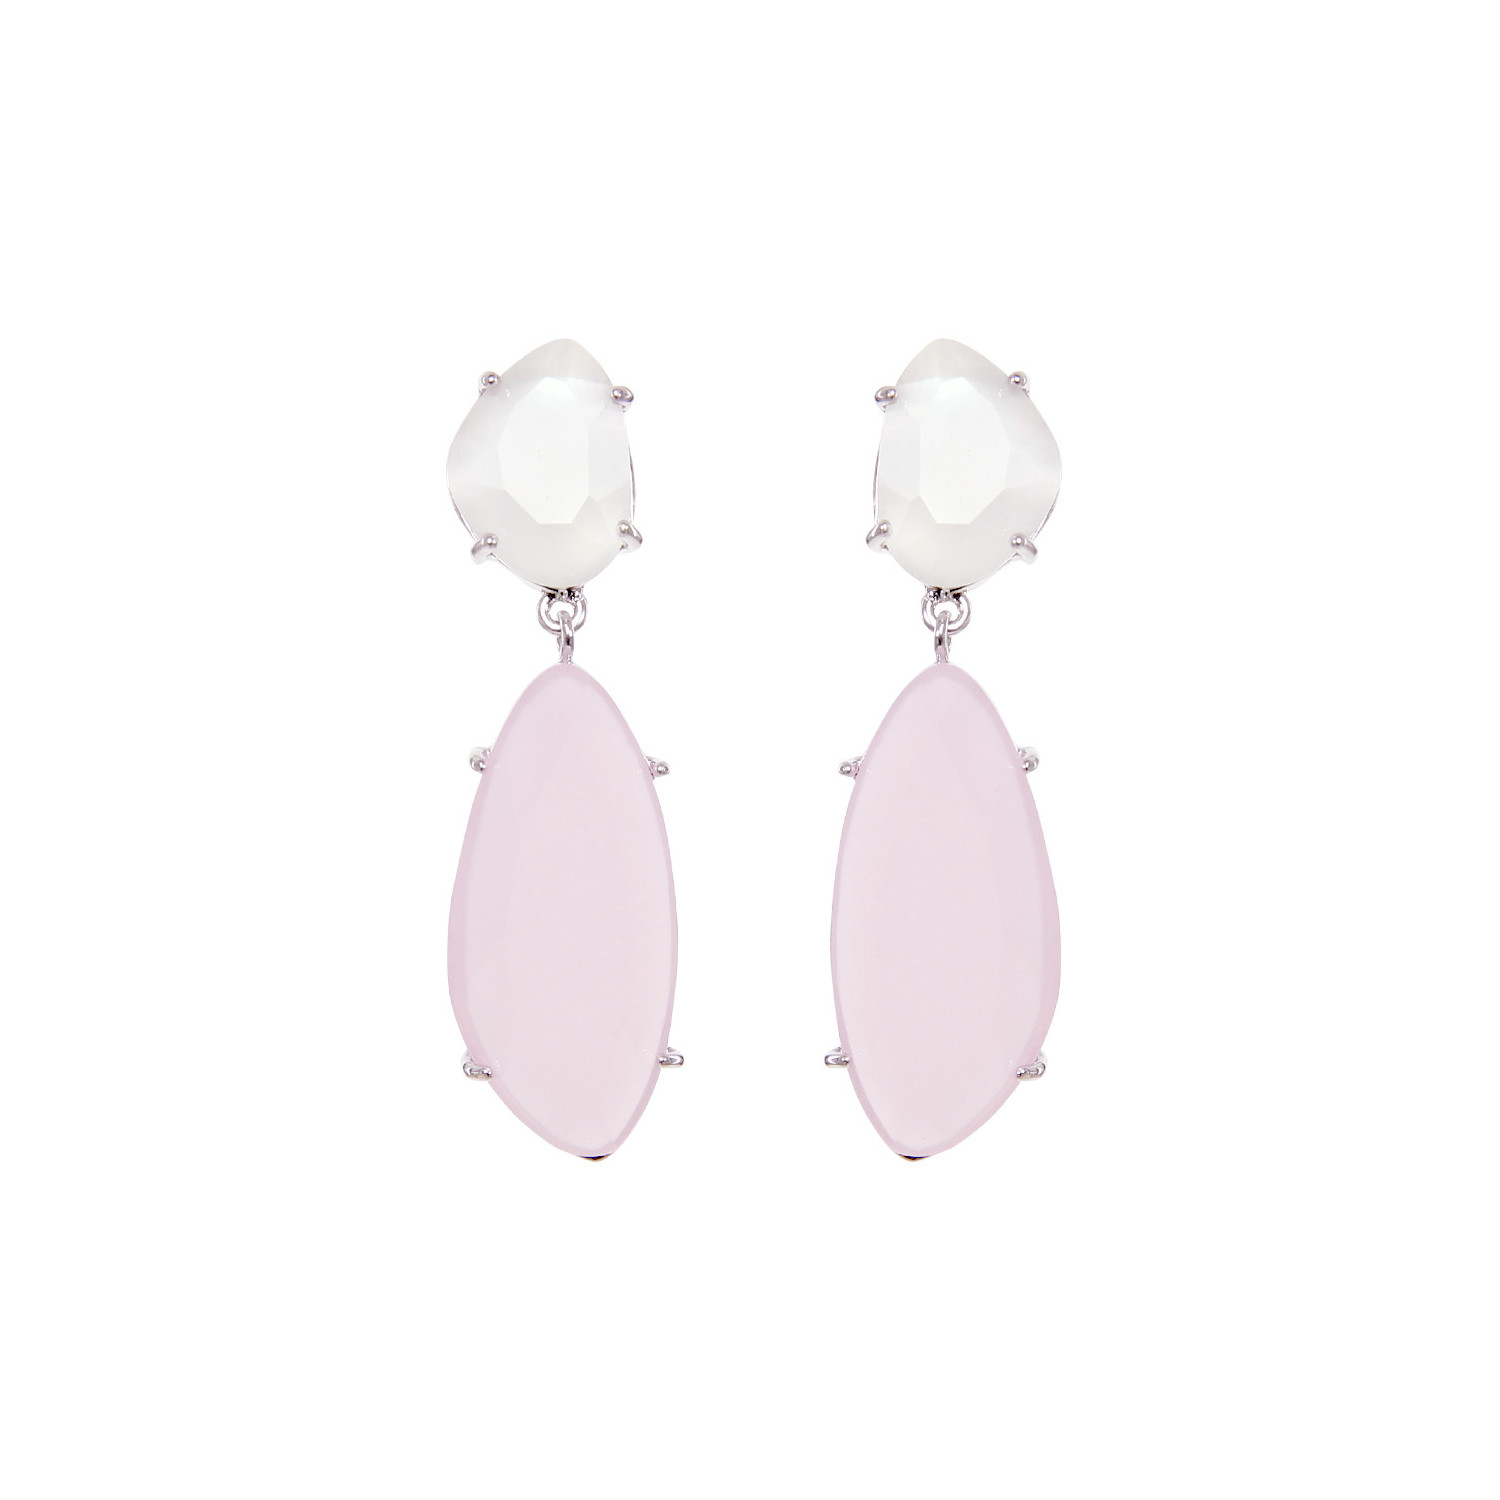 Starlight Silver Droplets Earrings with pink stone